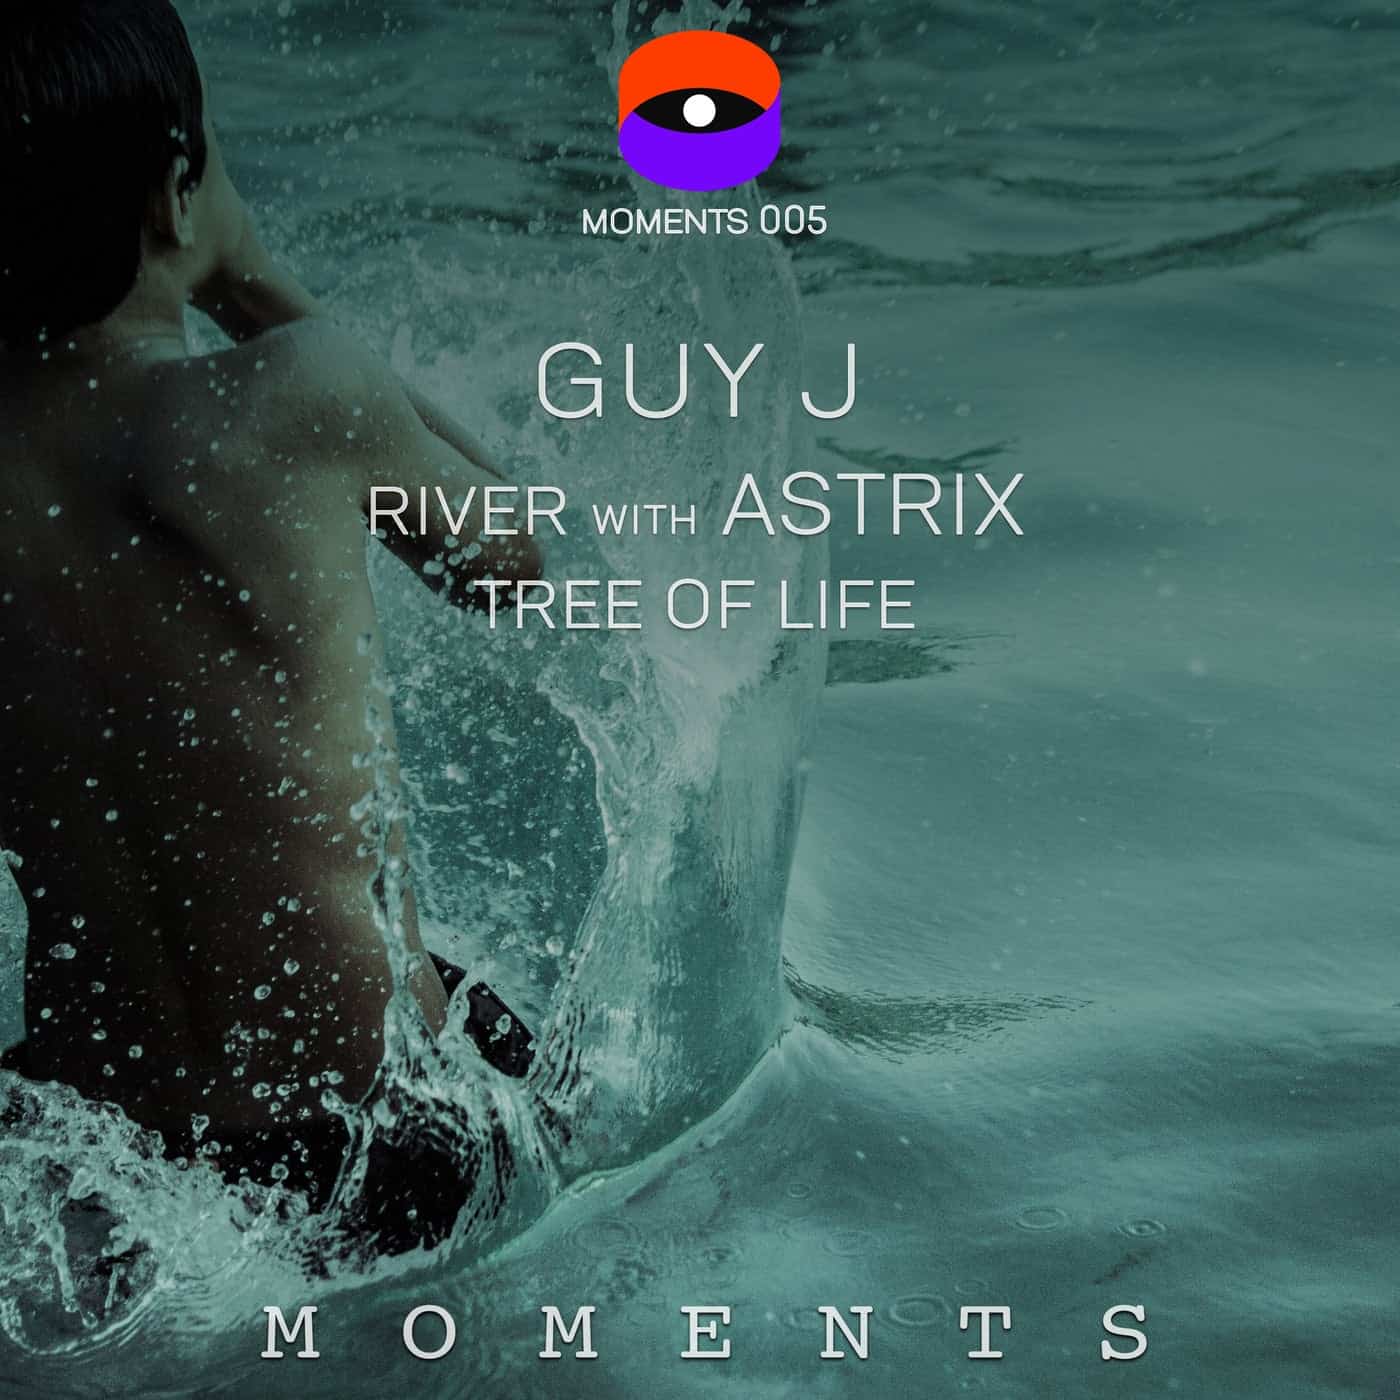 image cover: Guy J - River / Tree of Life / MOMENTS005